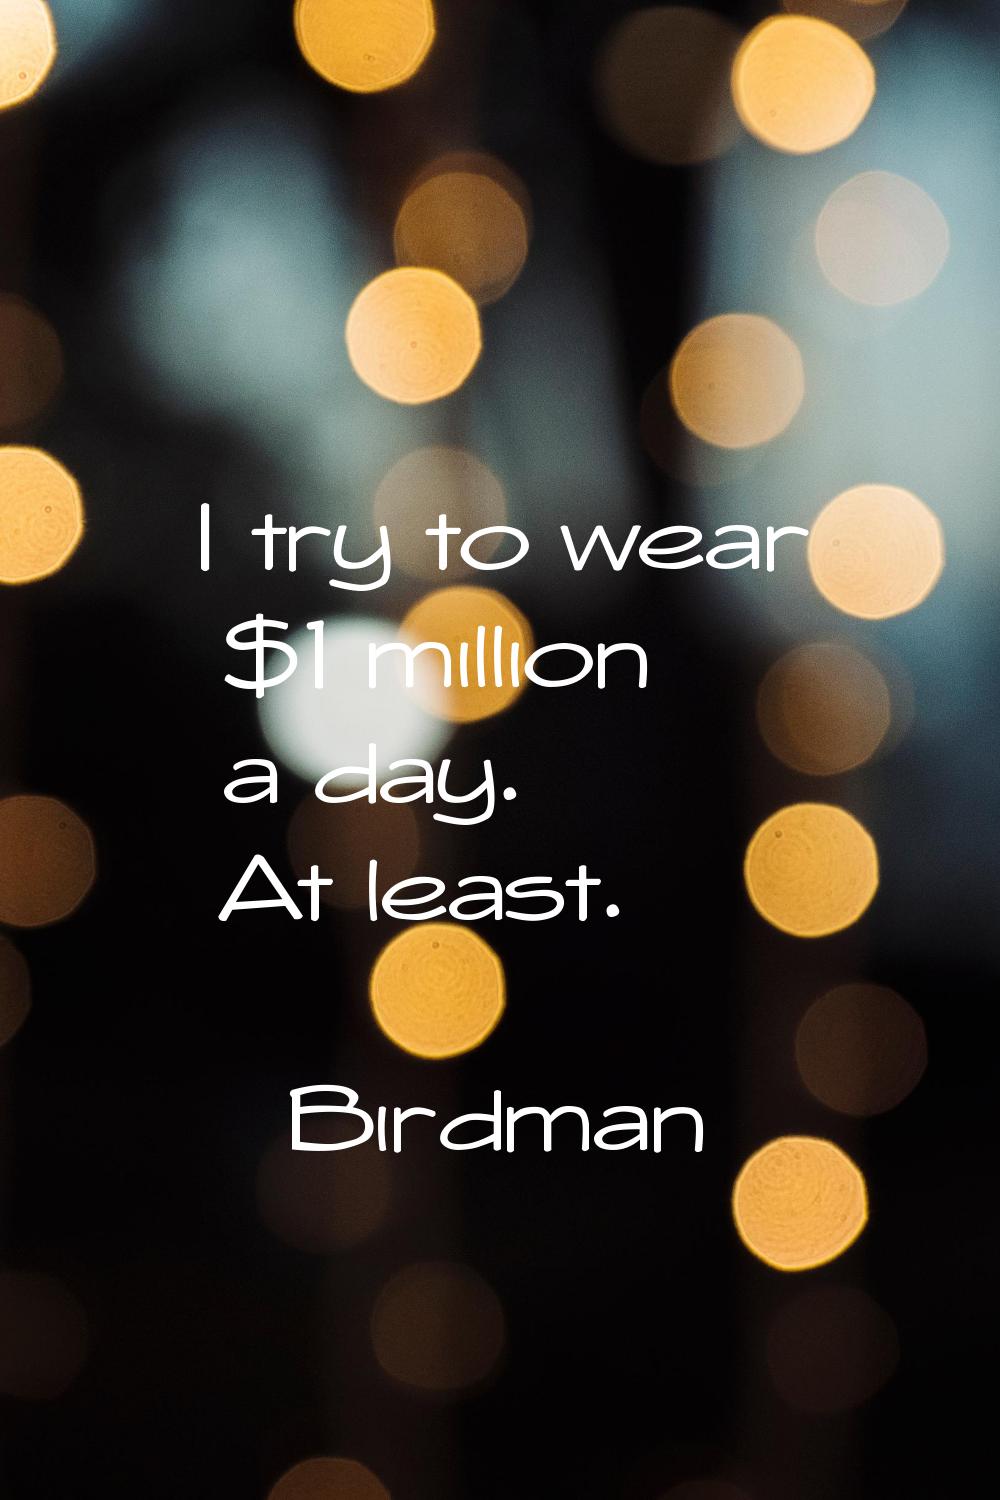 I try to wear $1 million a day. At least.